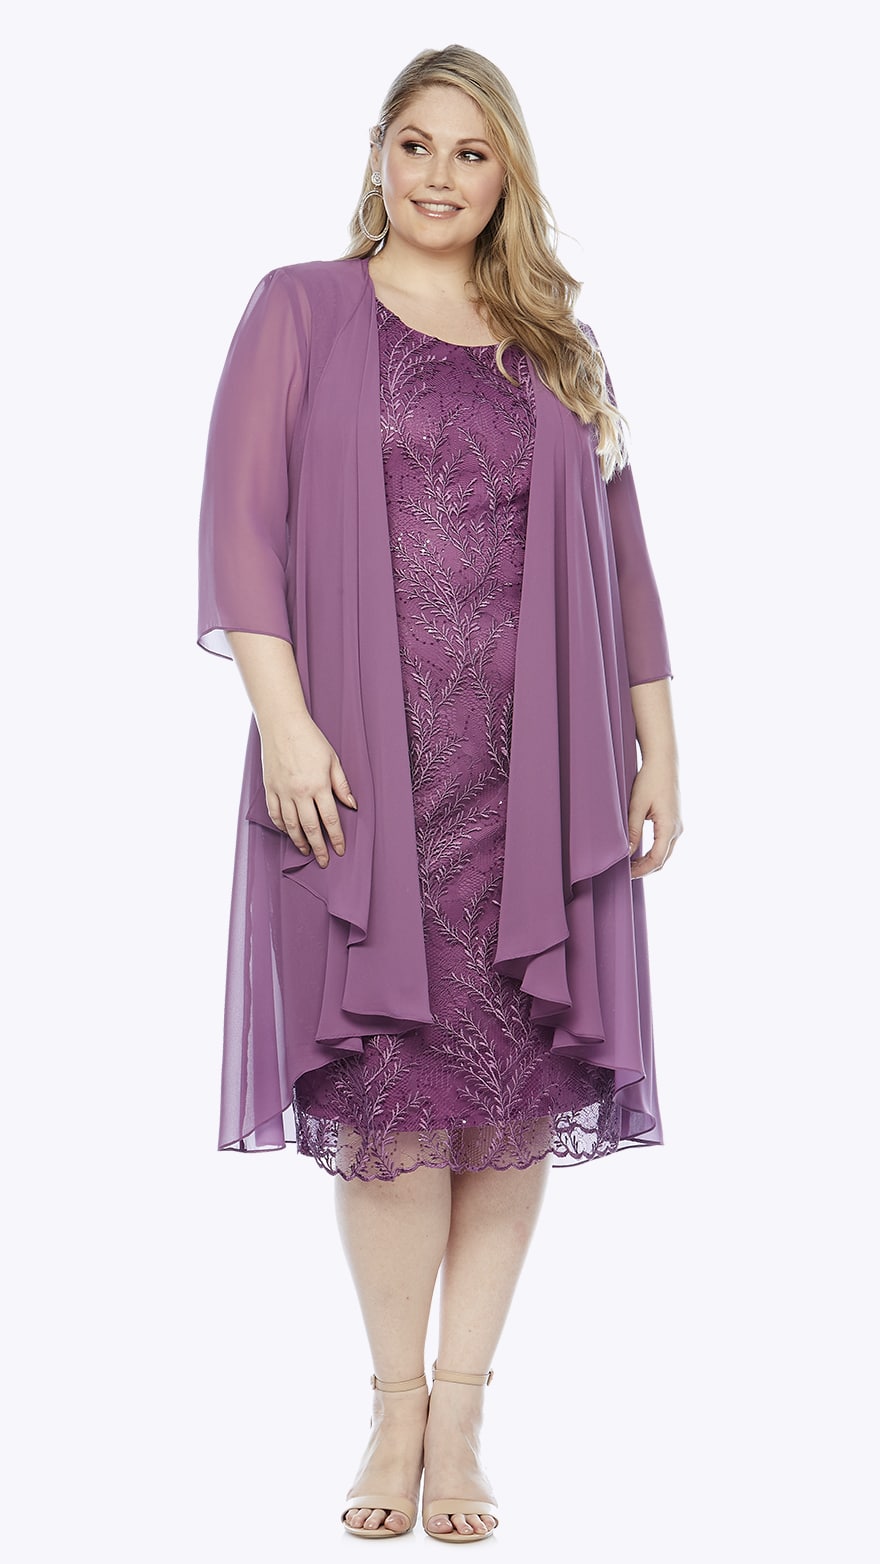 Embroidered lace dress with long chiffon coat.JPG